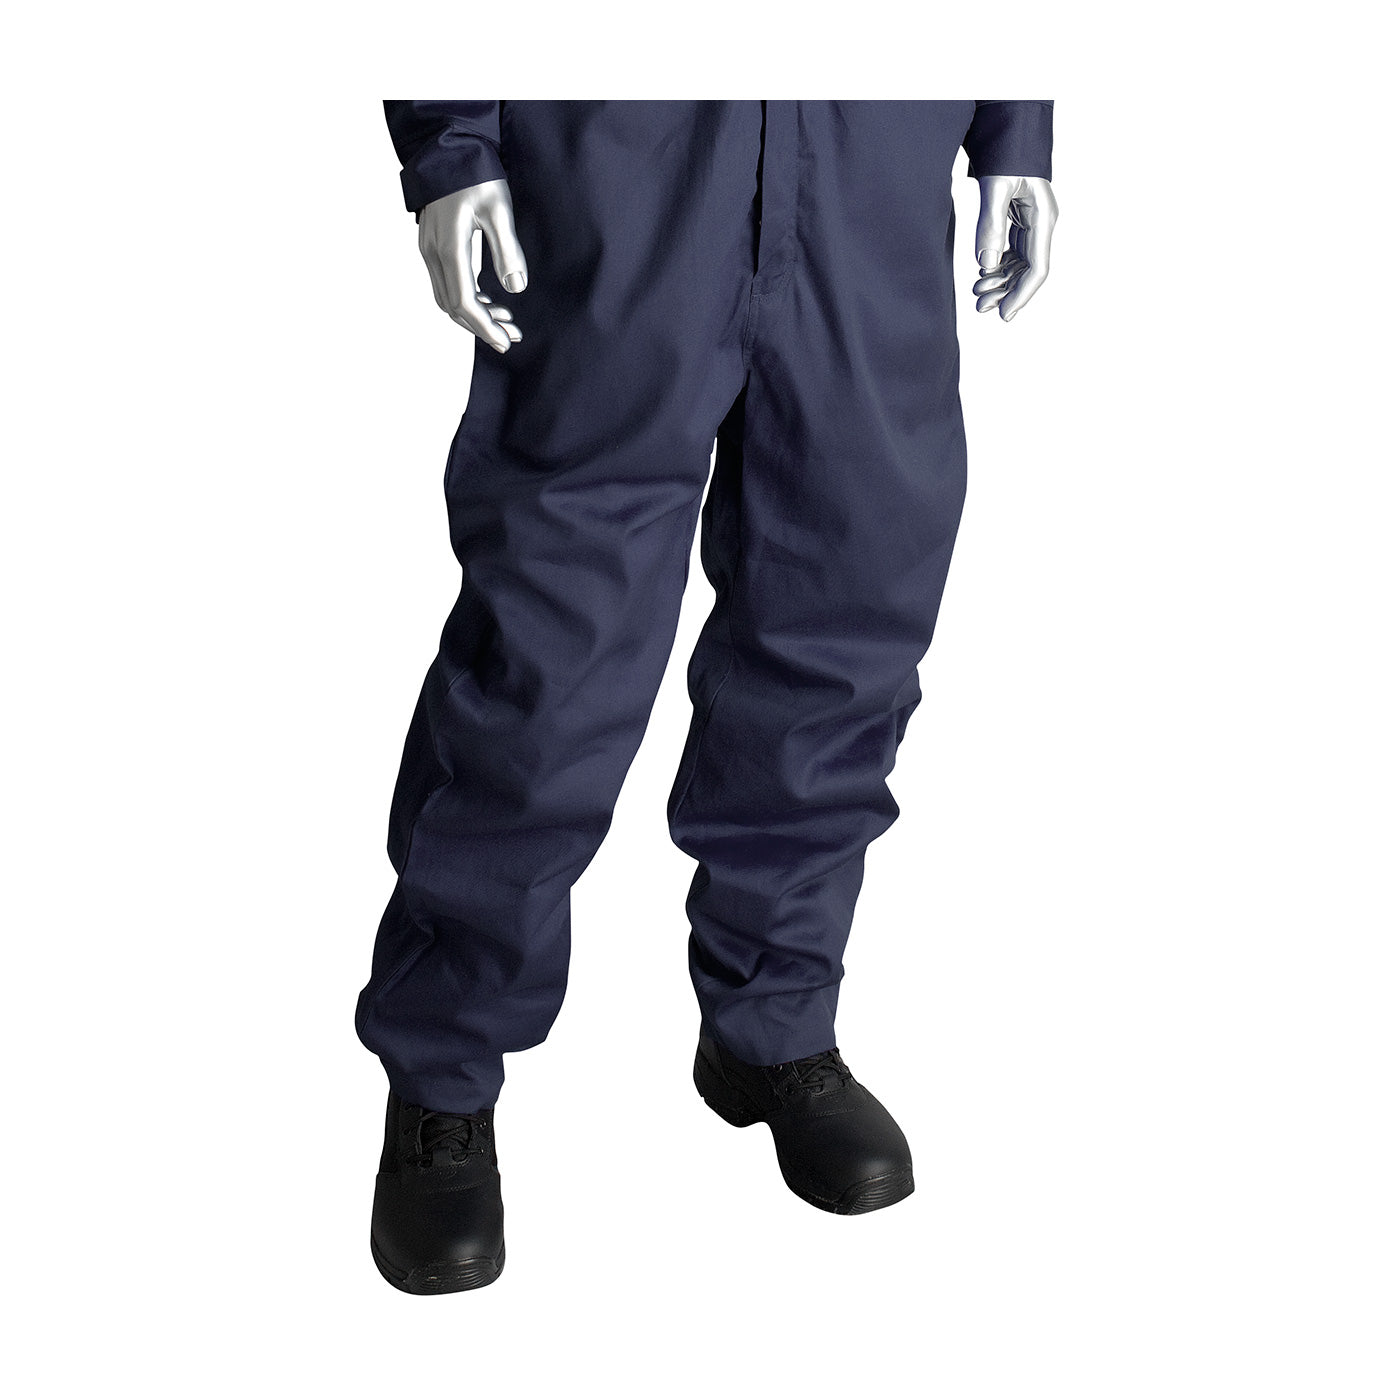 PIP 385-FRSC-NV/L AR/FR Dual Certified Coverall with Zipper Closure - 9.2 Cal/cm2